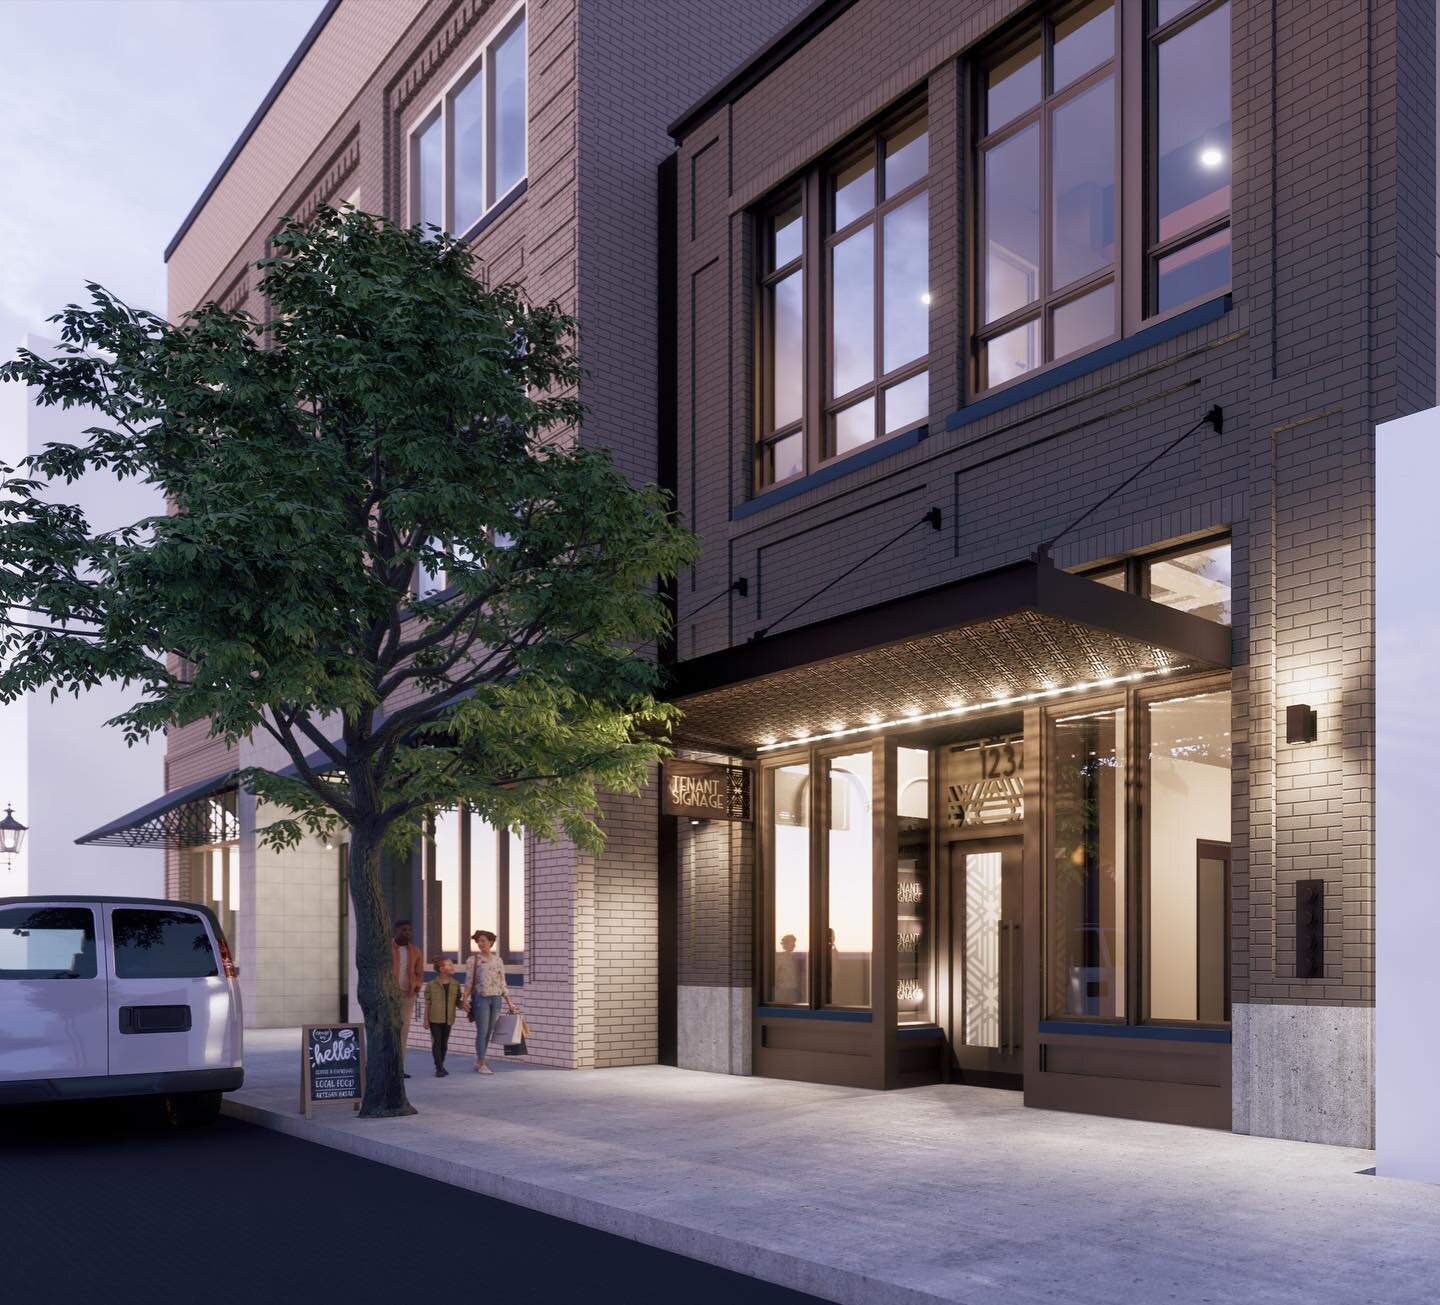 We can&rsquo;t wait for this absolute stunner to start construction&hellip;This show stopper is in a National Historic District and will be bringing much needed housing to our city and we simply adore her. 🥰

#architecture #design #pdx #housing #sep